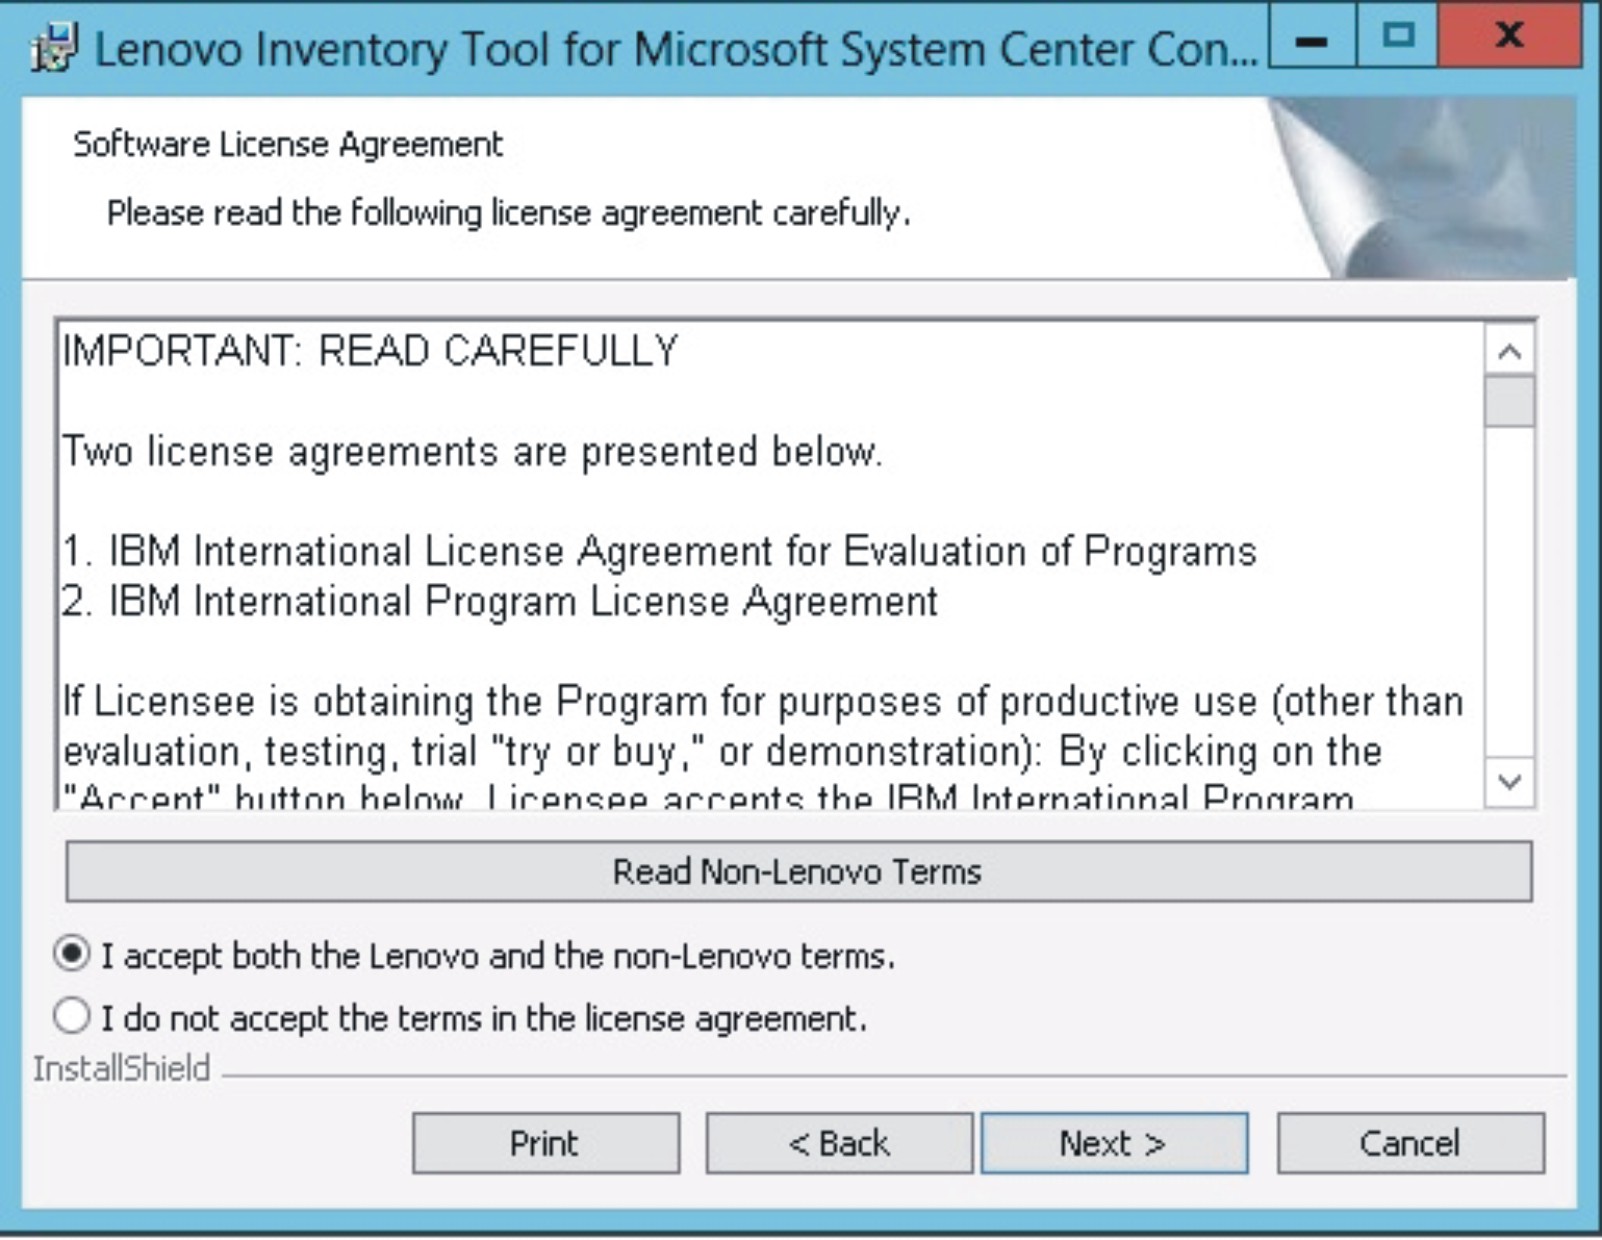 Software License agreement